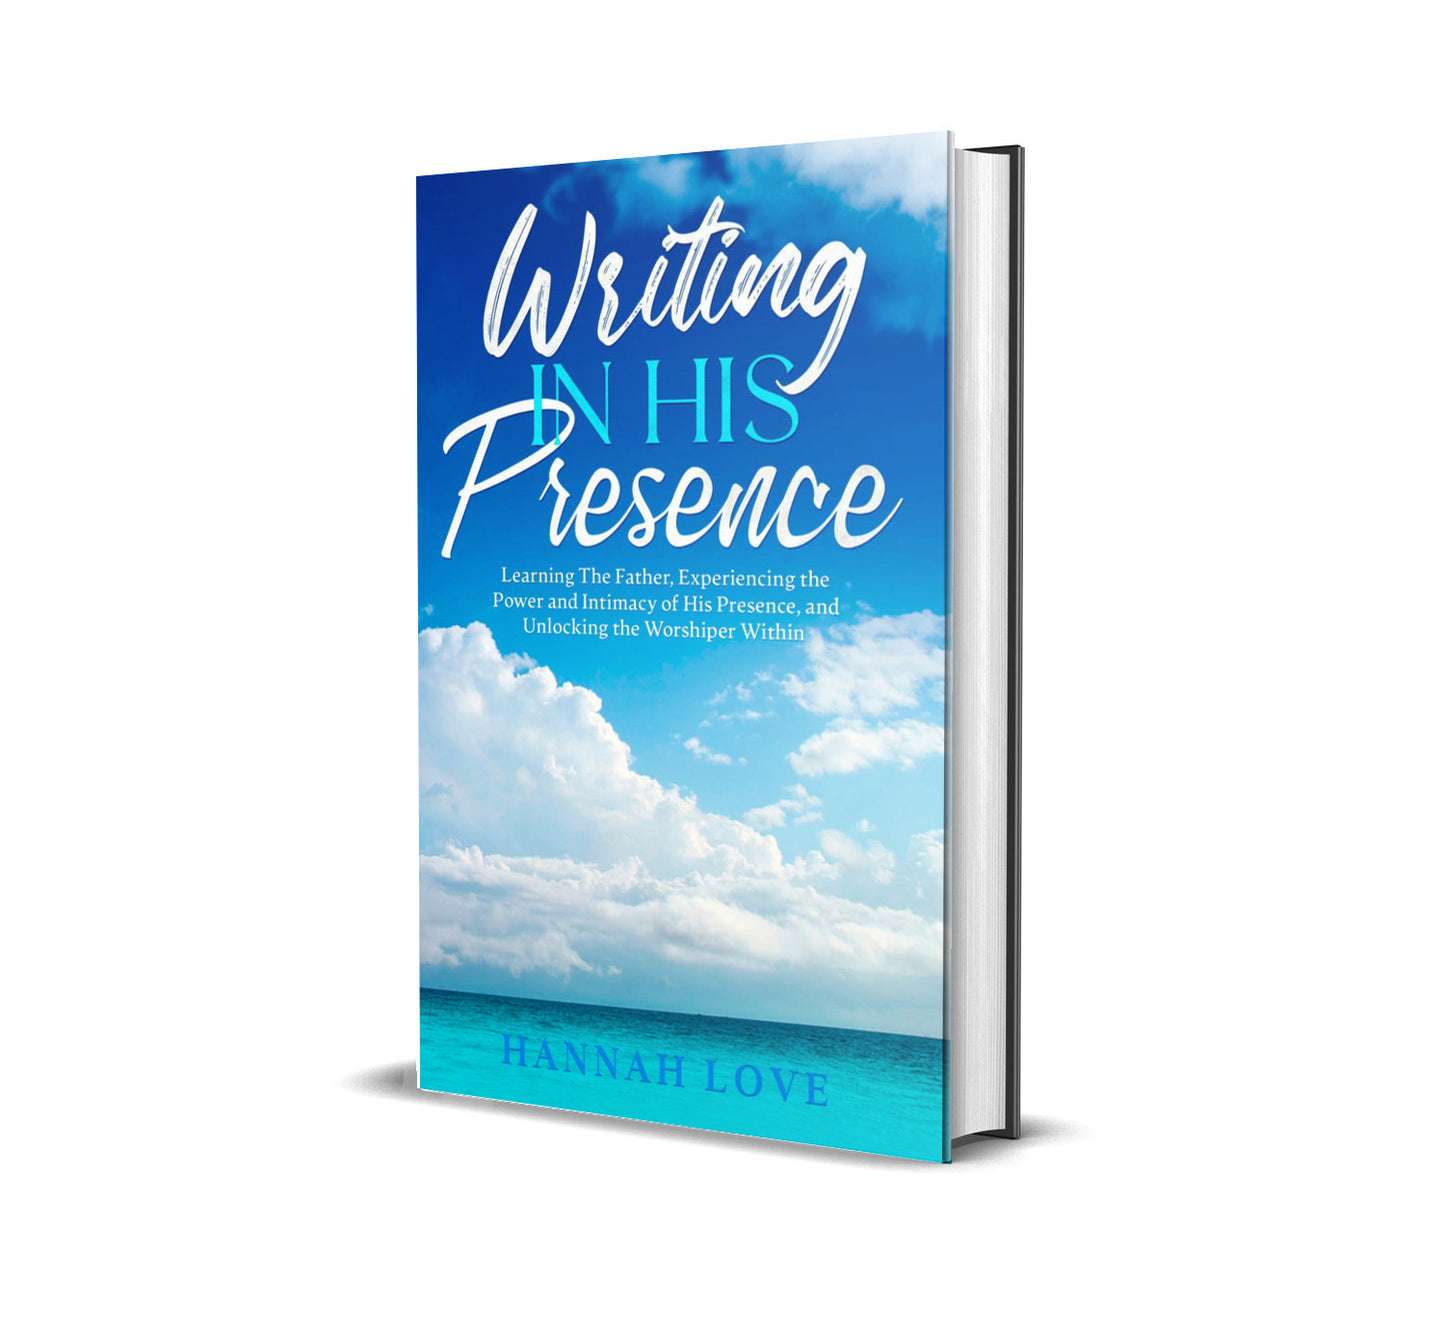 Paperback - WRITING IN HIS PRESENCE BY HANNAH LOVE